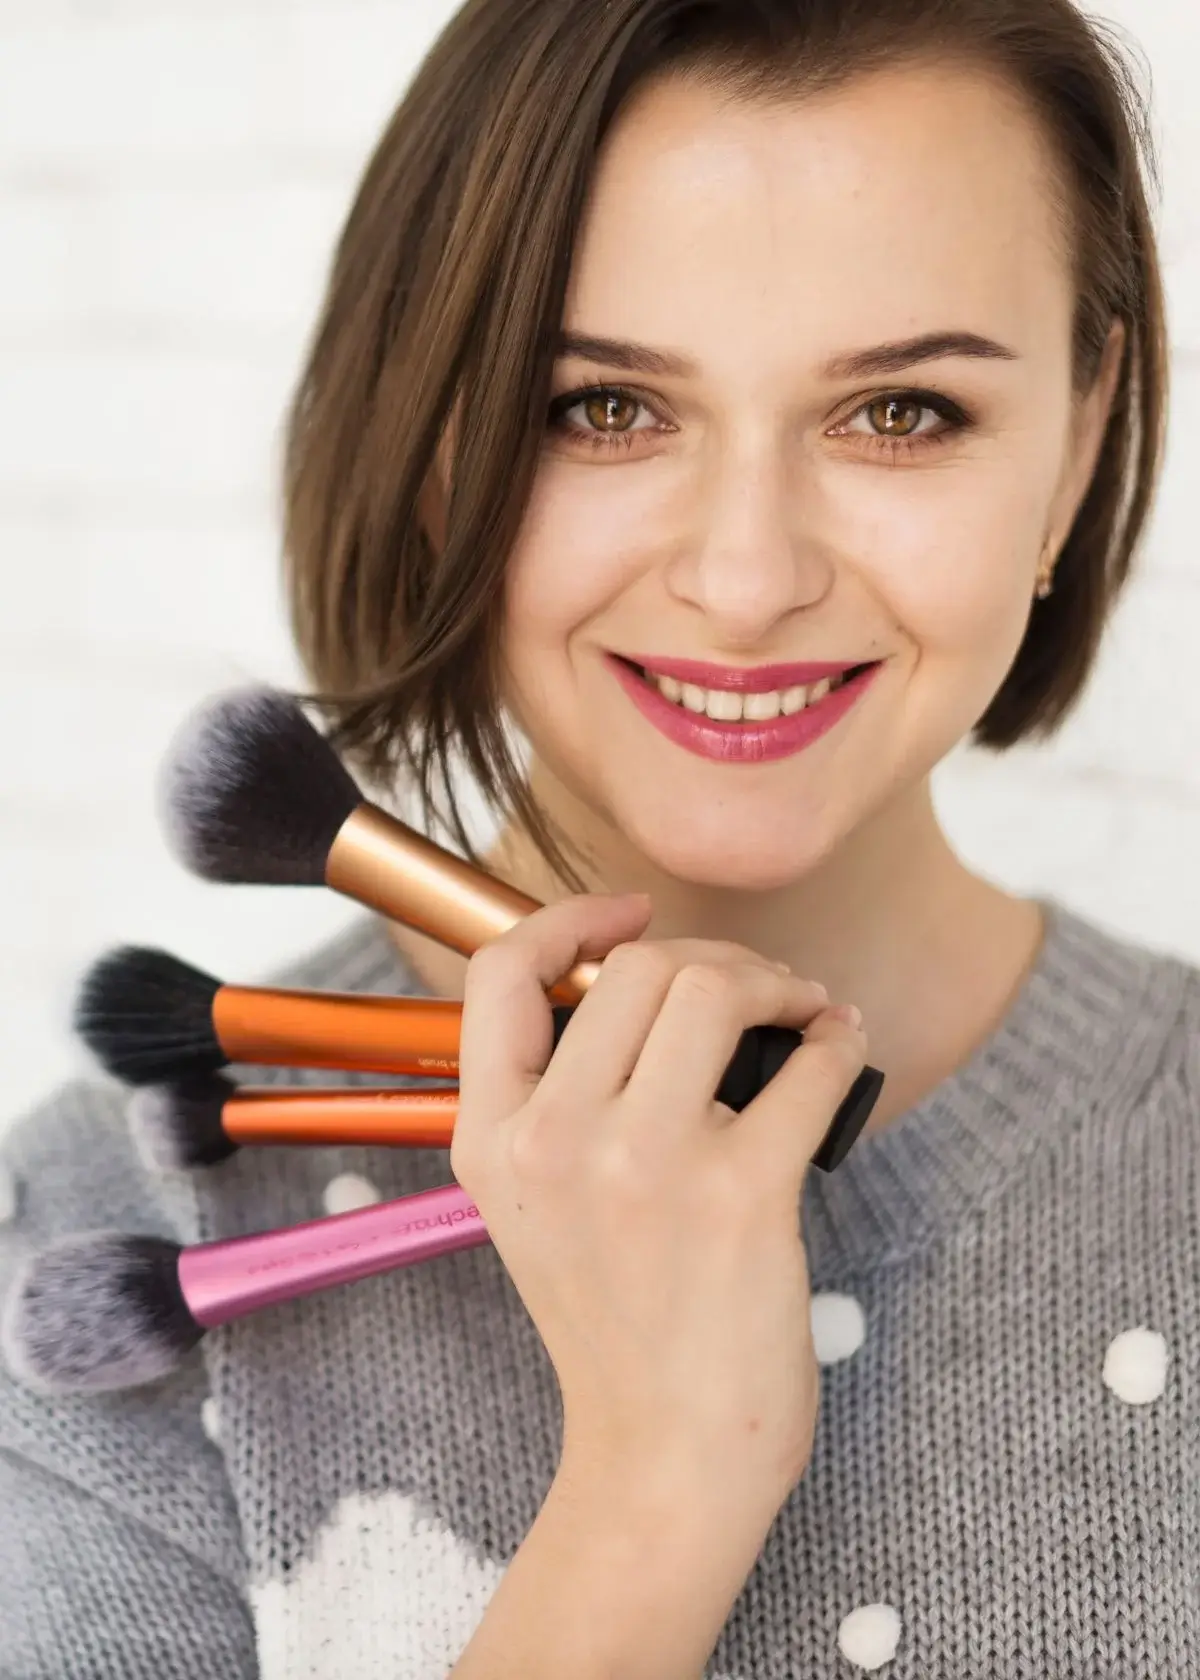 How to choose the right makeup brush?